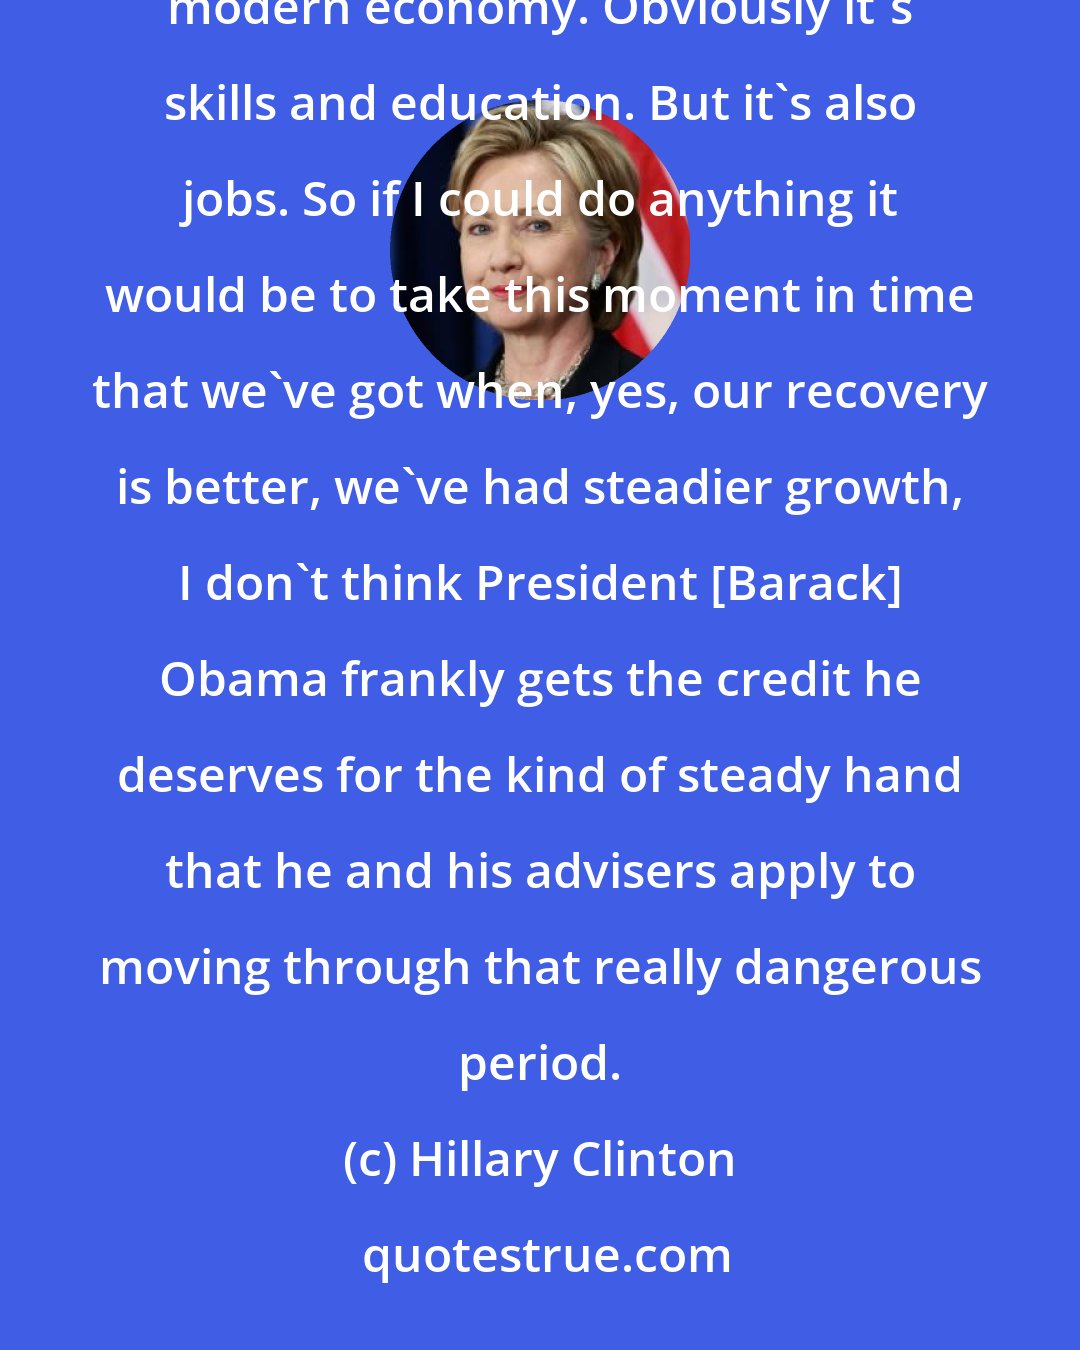 Hillary Clinton: How do we create jobs for so many Americans who are feeling pushed out, not just left out, pushed out of the modern economy. Obviously it's skills and education. But it's also jobs. So if I could do anything it would be to take this moment in time that we've got when, yes, our recovery is better, we've had steadier growth, I don't think President [Barack] Obama frankly gets the credit he deserves for the kind of steady hand that he and his advisers apply to moving through that really dangerous period.